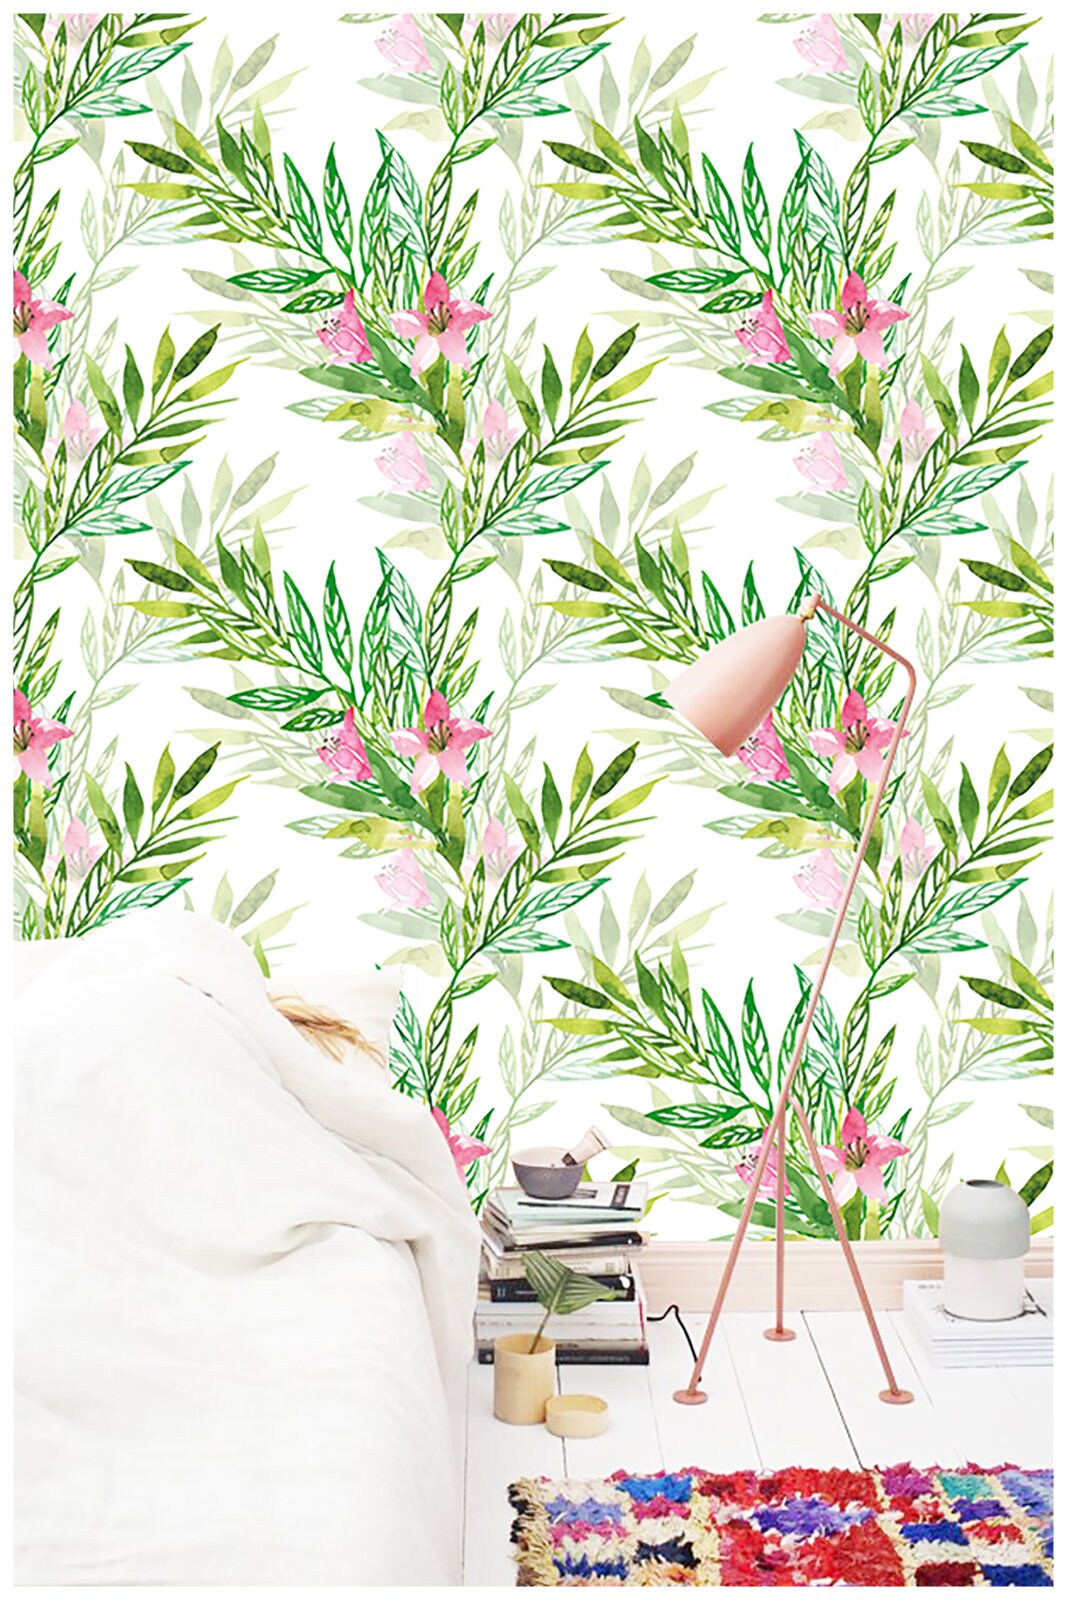 Floral Leaf Removable Self Adhesive Wallpaper White/green/pink - Etsy